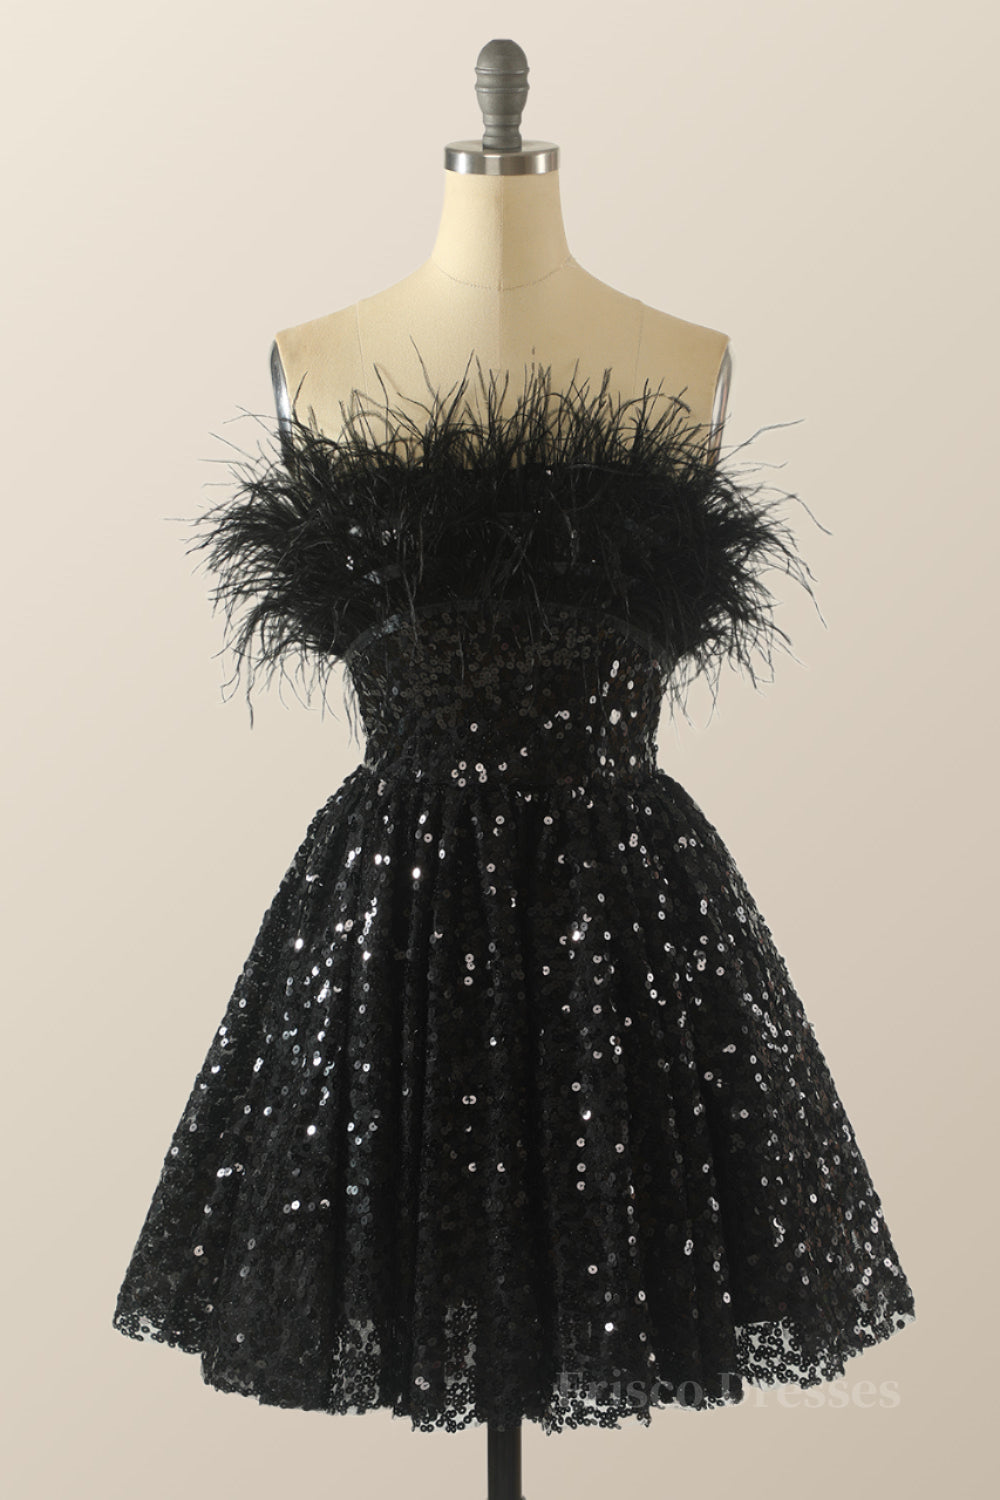 Strapless Feather Black A-line Short Homecoming Dress